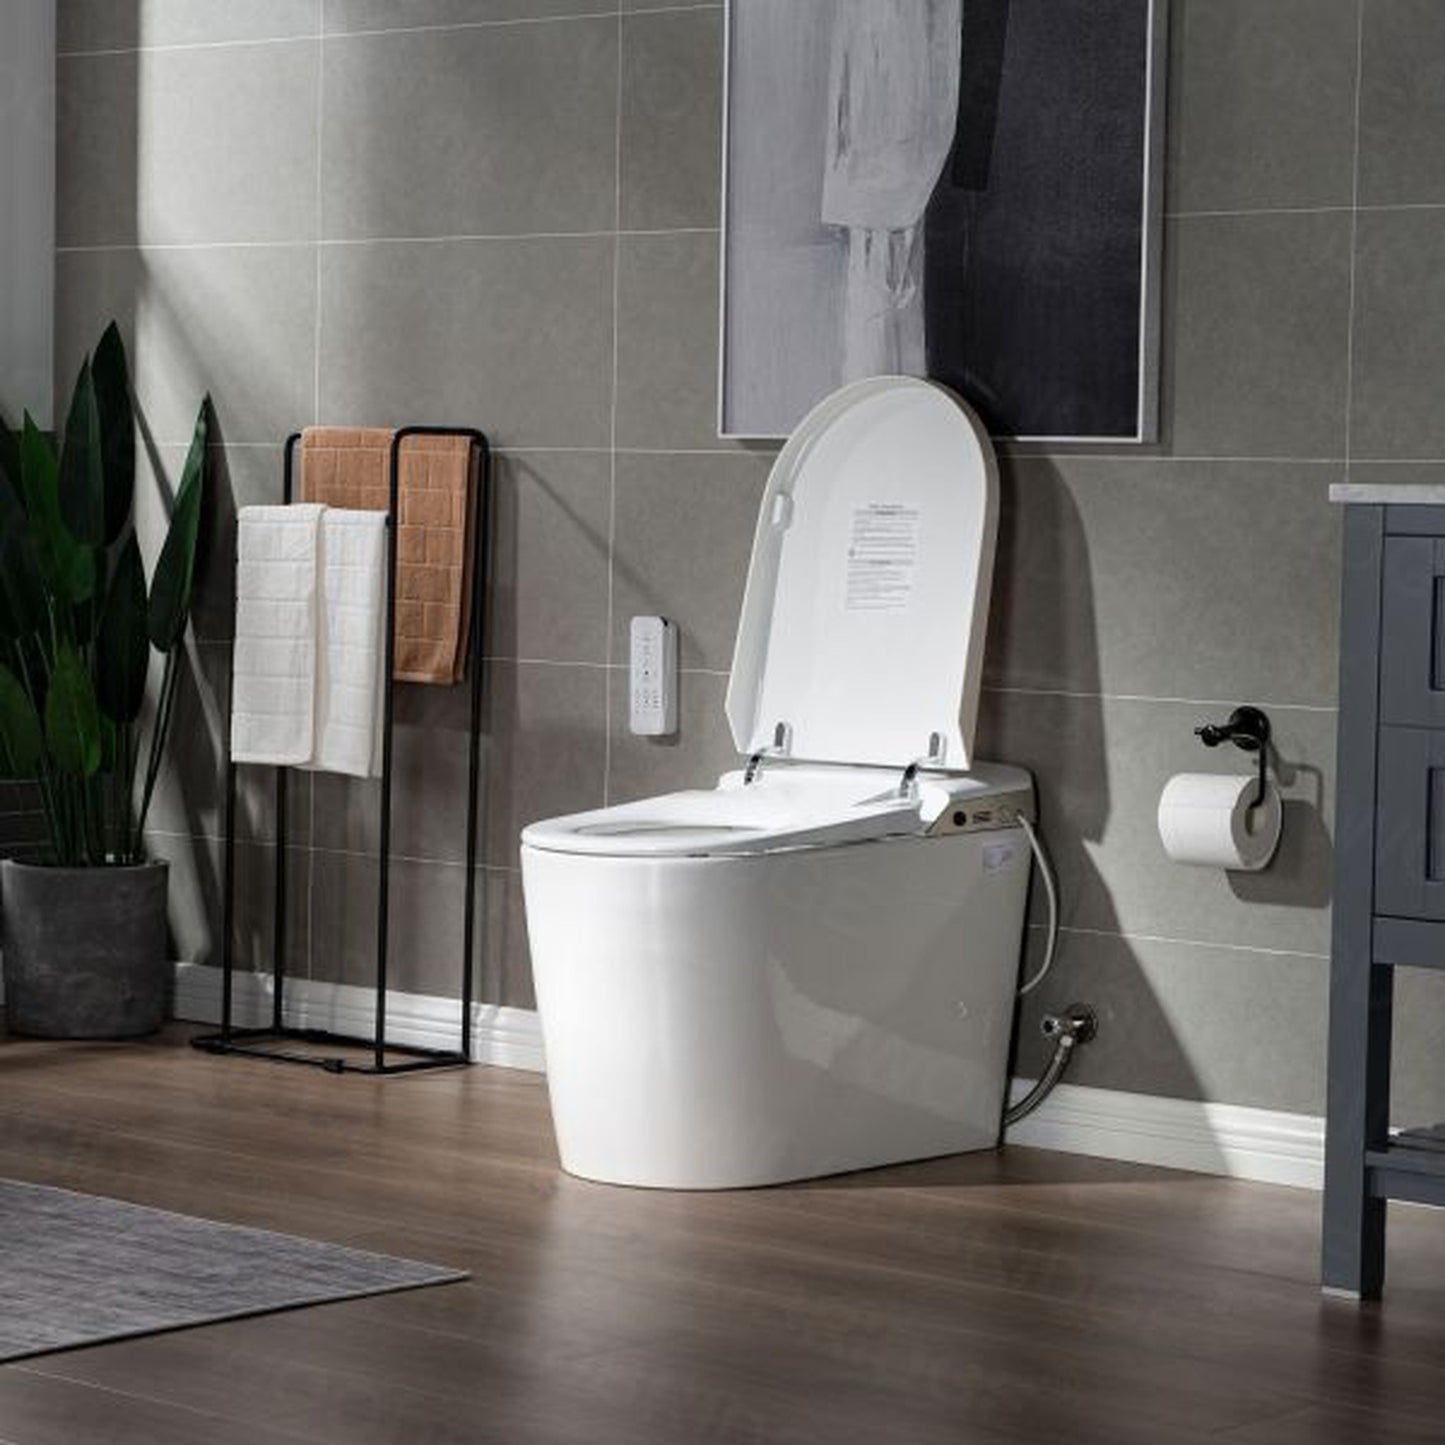 WoodBridge B0980S White Intelligent Smart Toilet, Massage Washing, Open & Close, Auto Flush,Heated Integrated Multi Function Remote Control With Advance Bidet and Soft Closing Seat